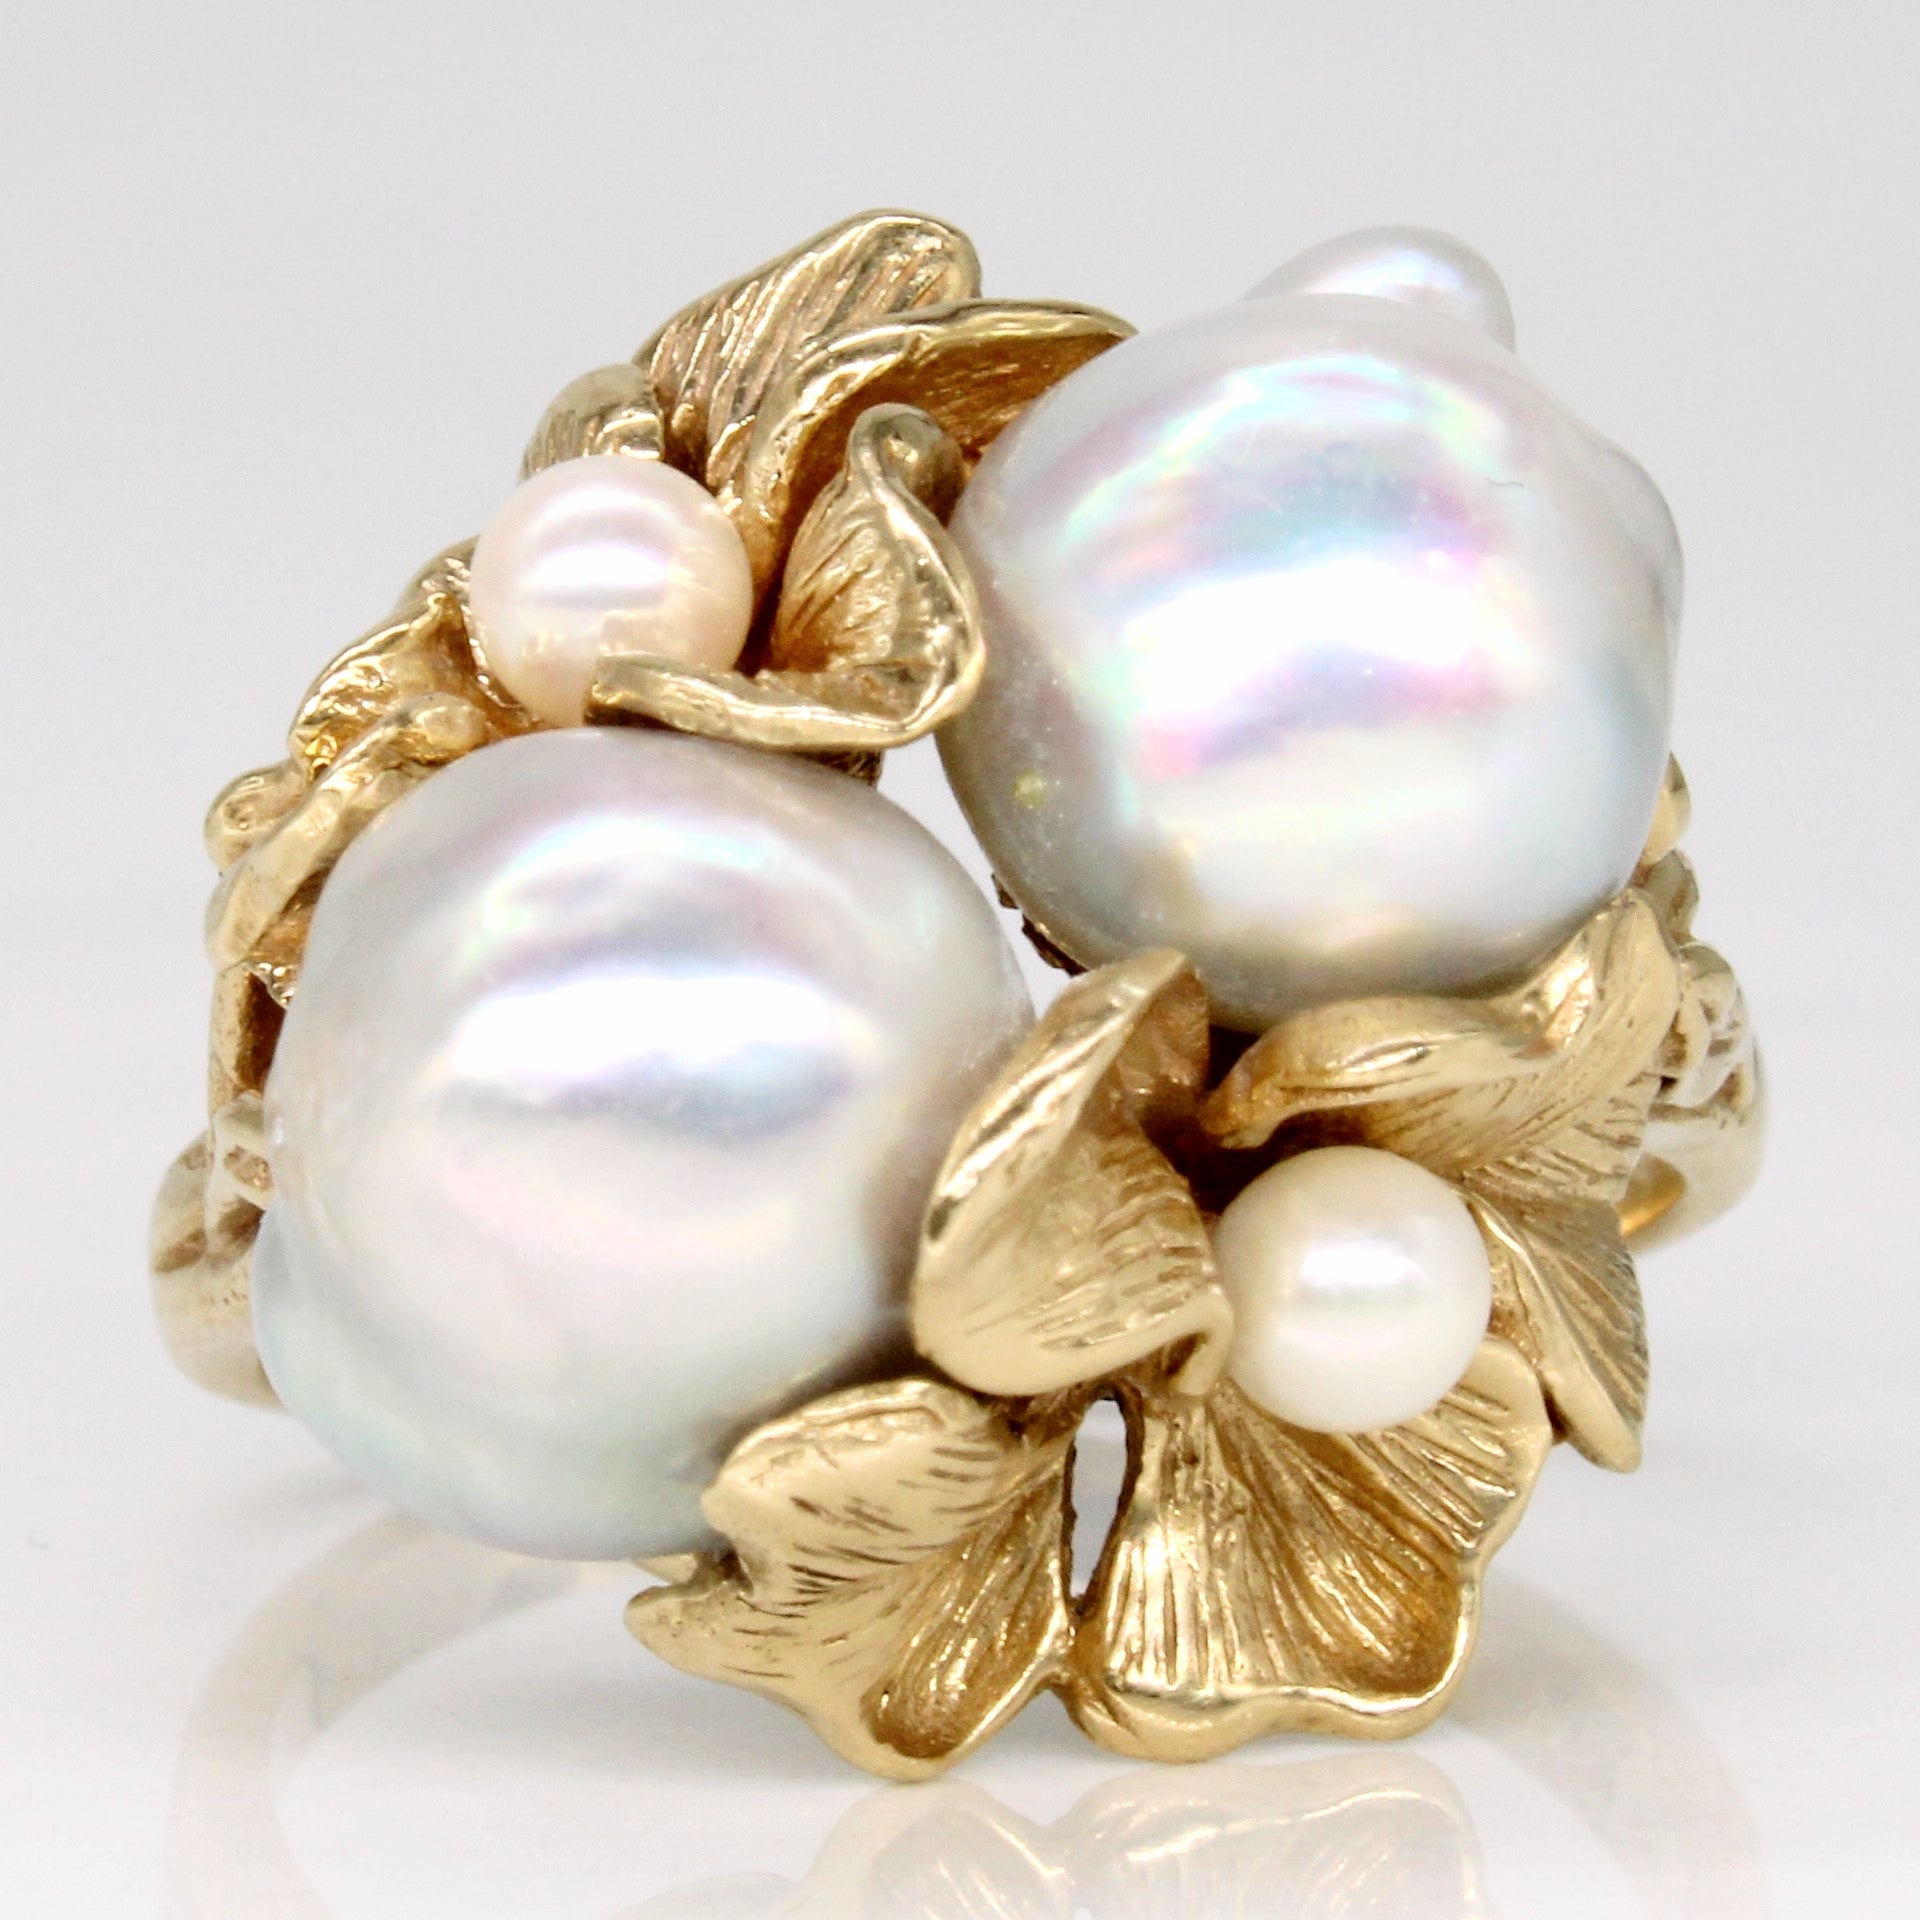 Baroque Pearl Cocktail Ring | SZ 8.75 |